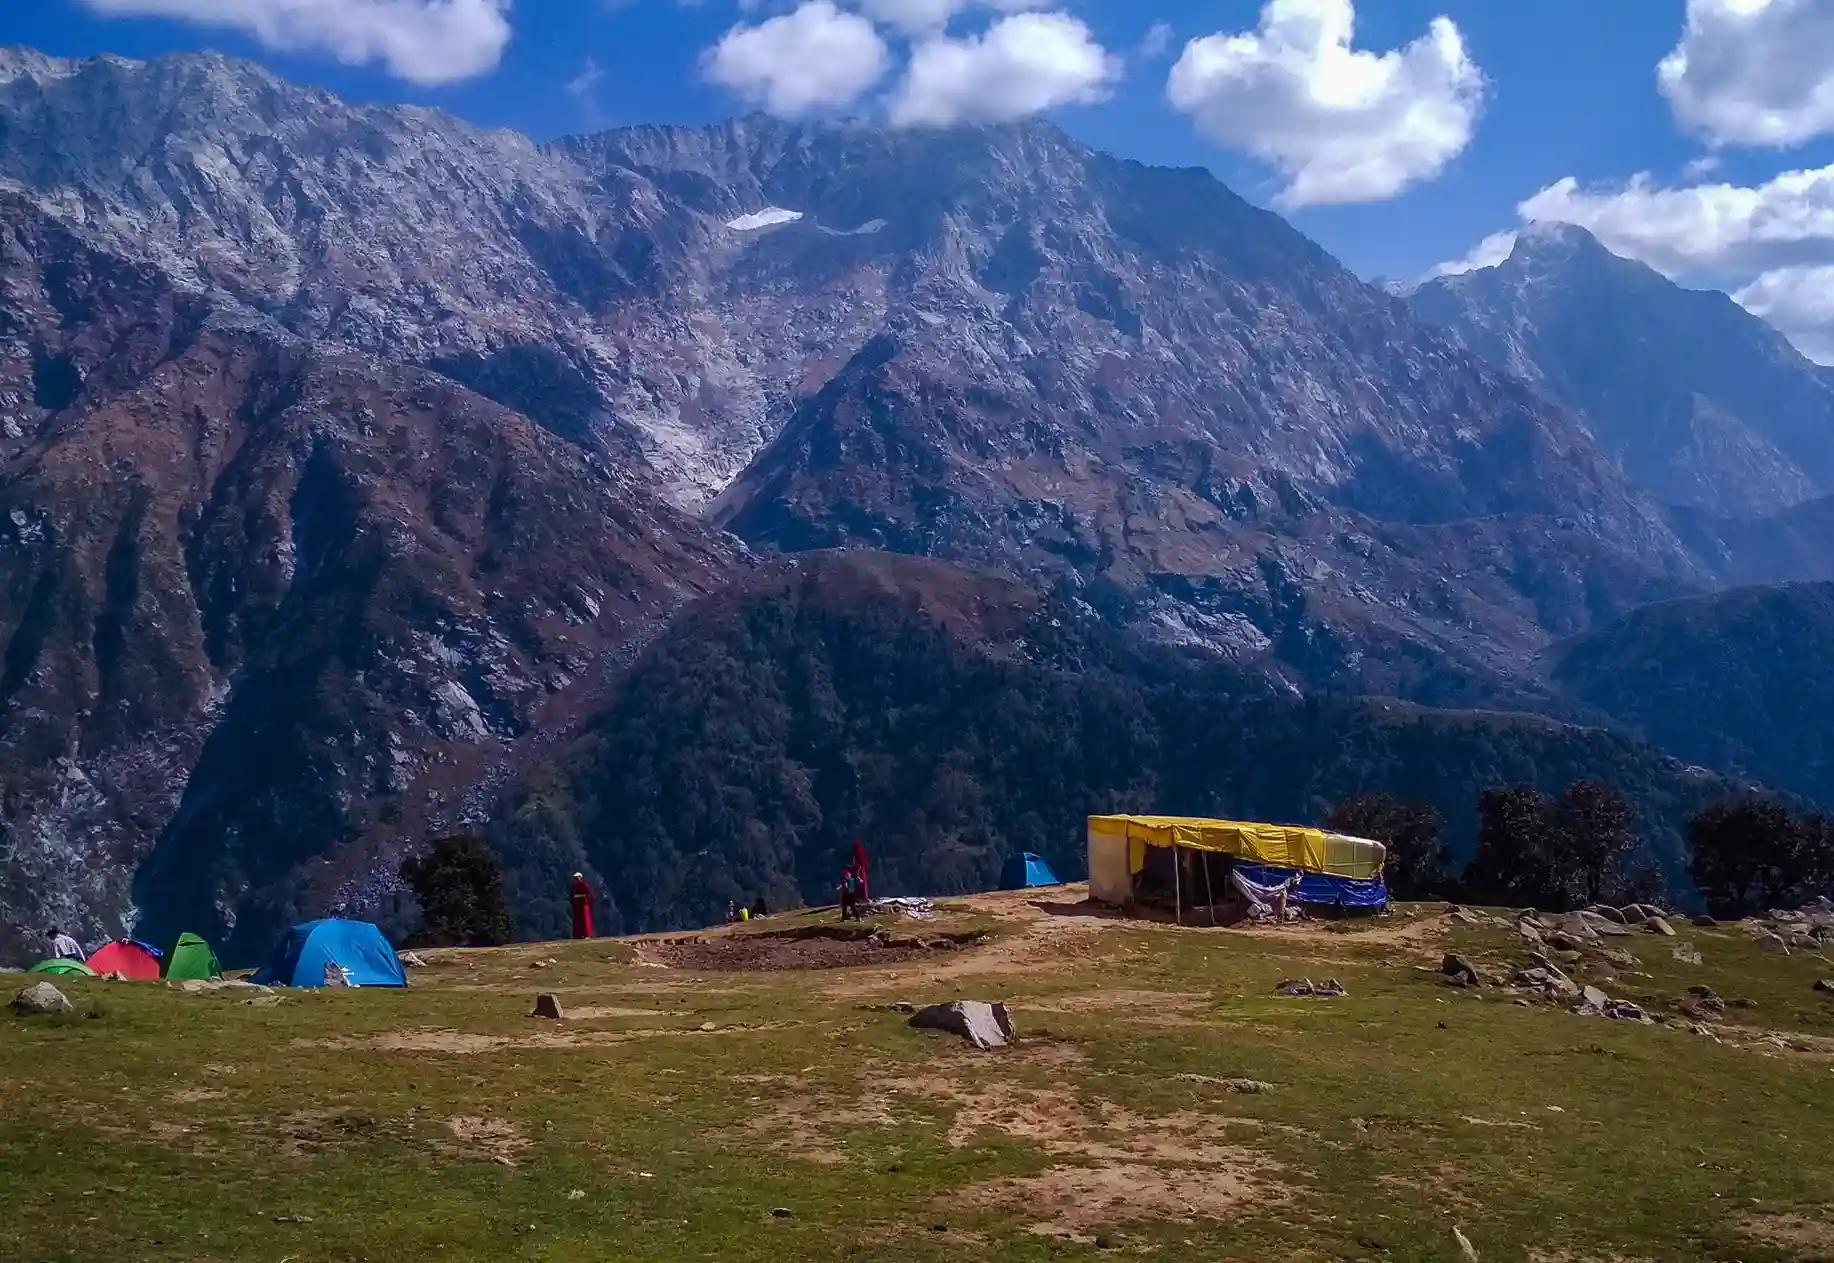 Day Excursion of Bashisht & Patalsu Peak from Manali with Burwa